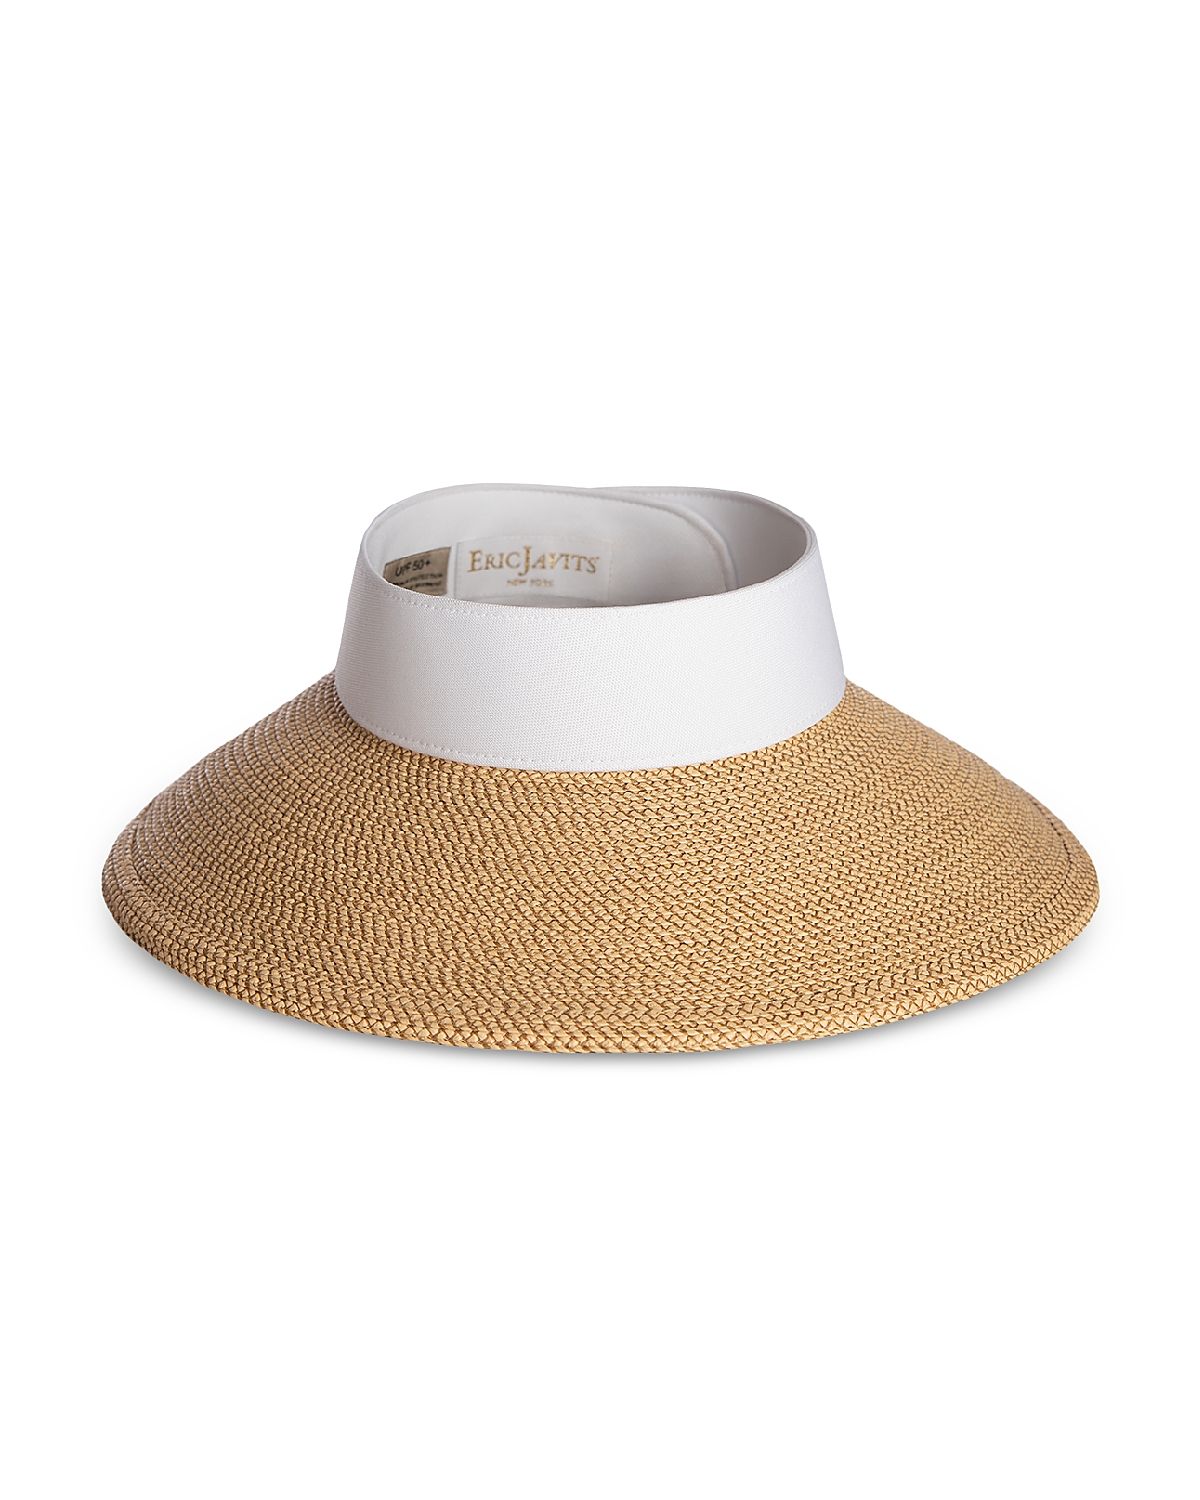 <p><strong>$295.00</strong></p><p>A hat is crucial, especially when traveling somewhere sunny, and I love this one that can be rolled up to fit more easily in your luggage. <em>—Parker Bowie Larson</em></p>